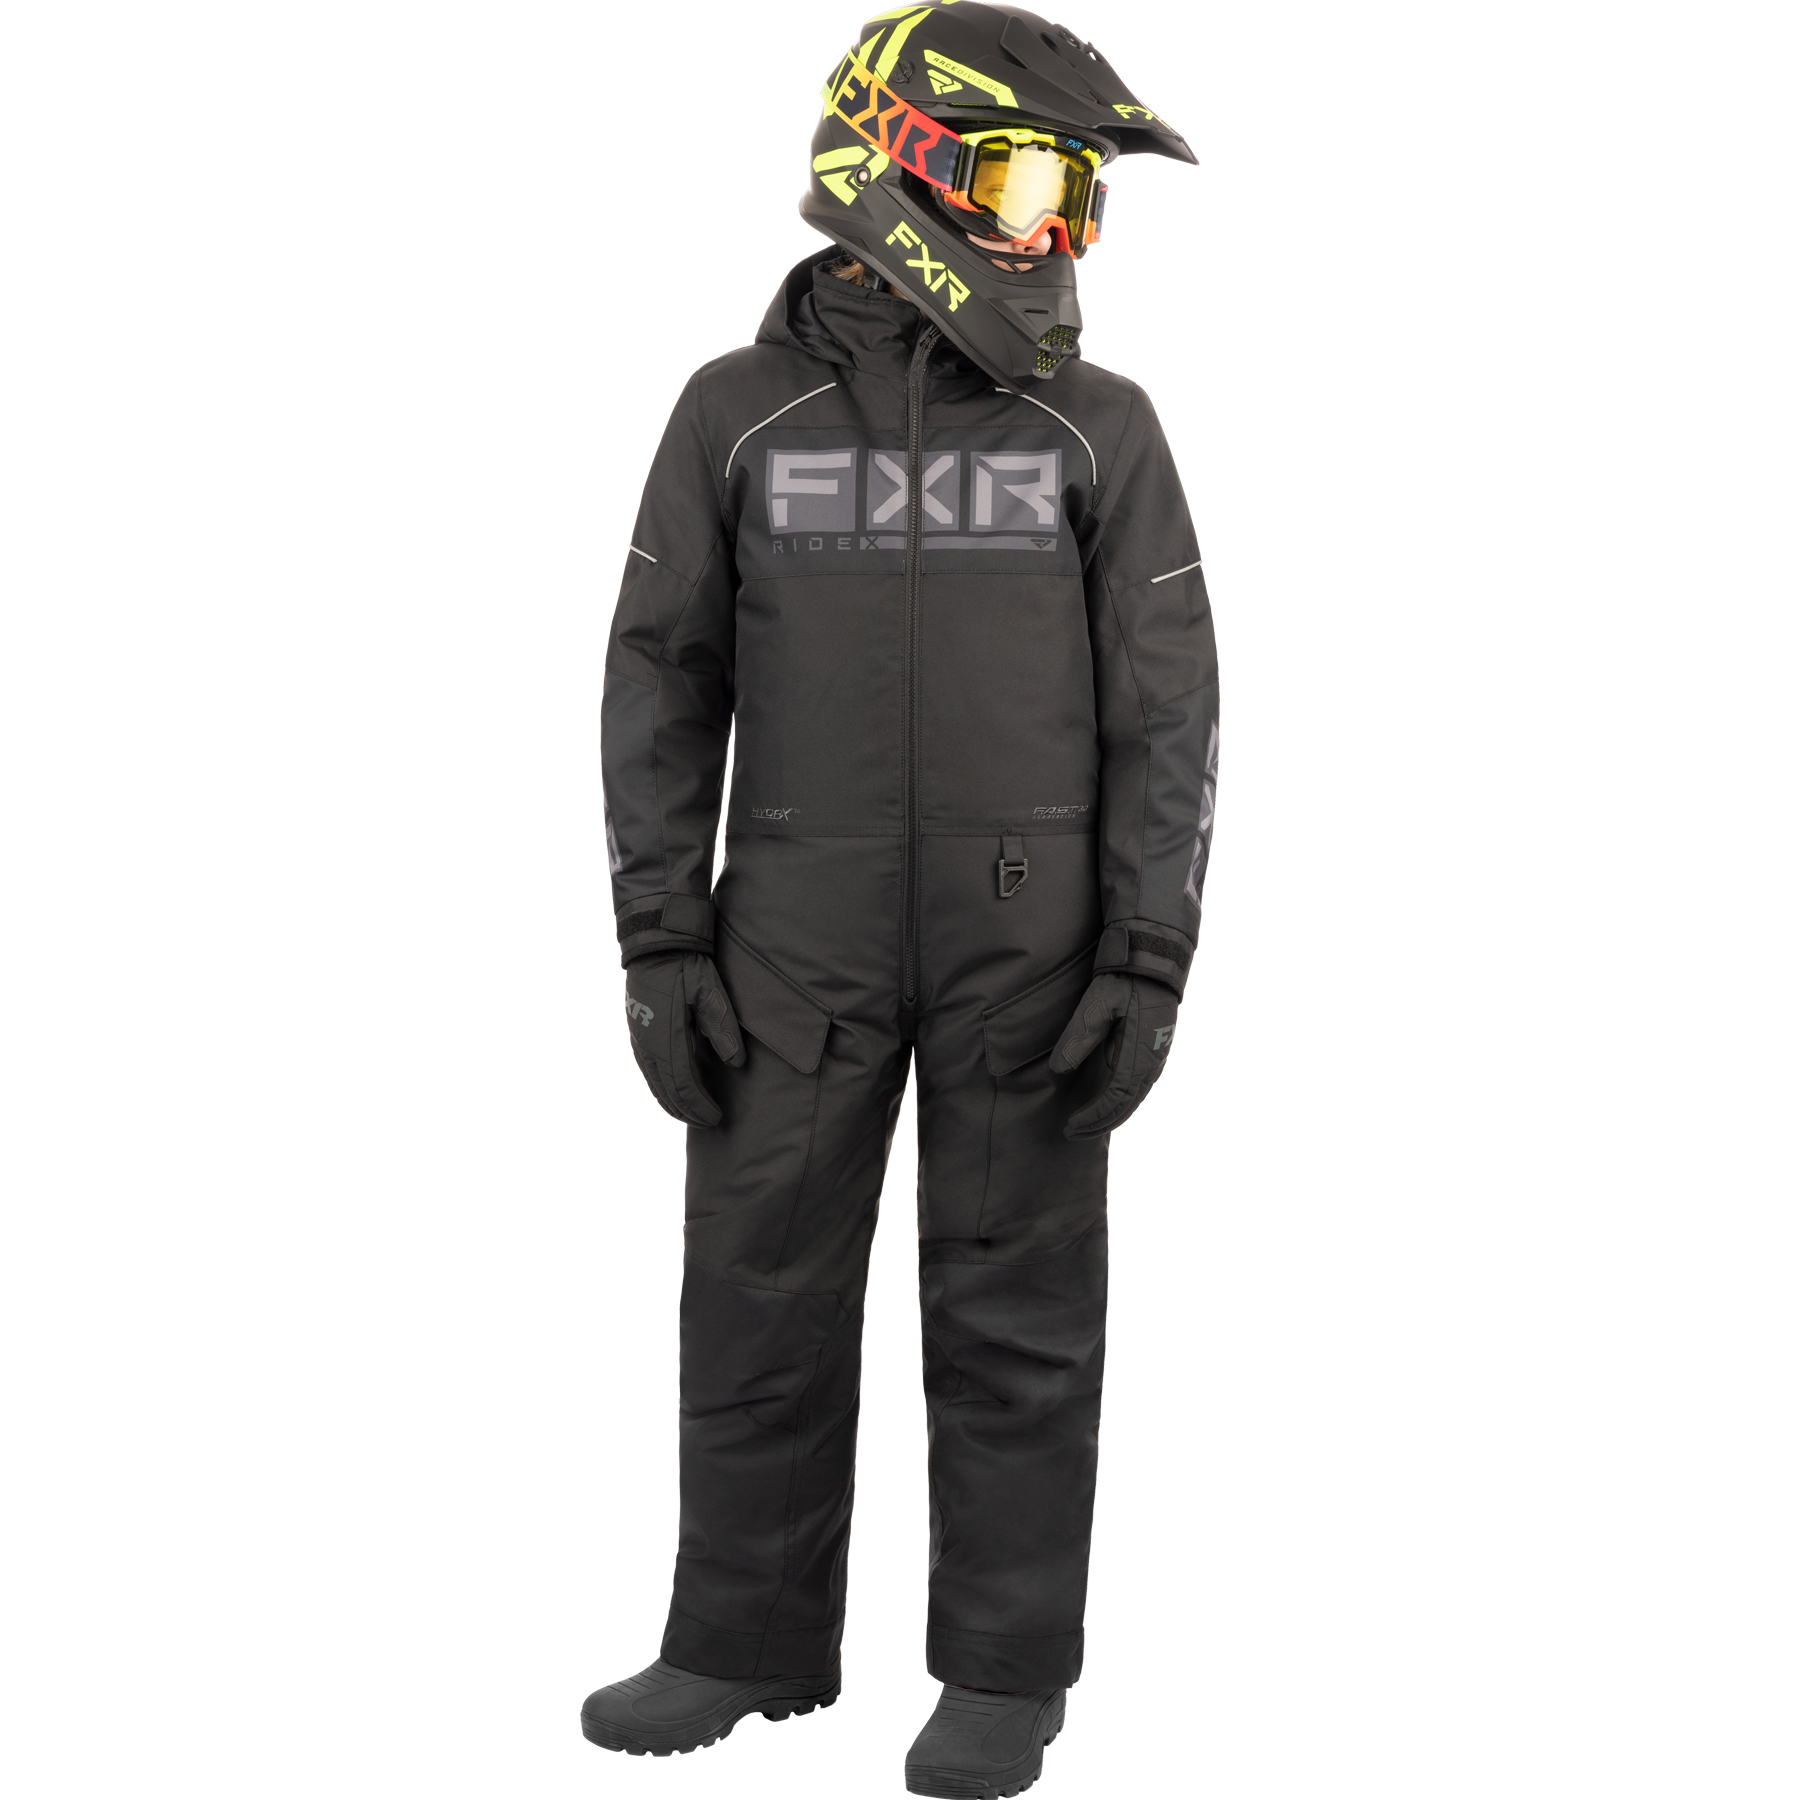 Onepiece FXR Child/Youth Recruit, Black Ops